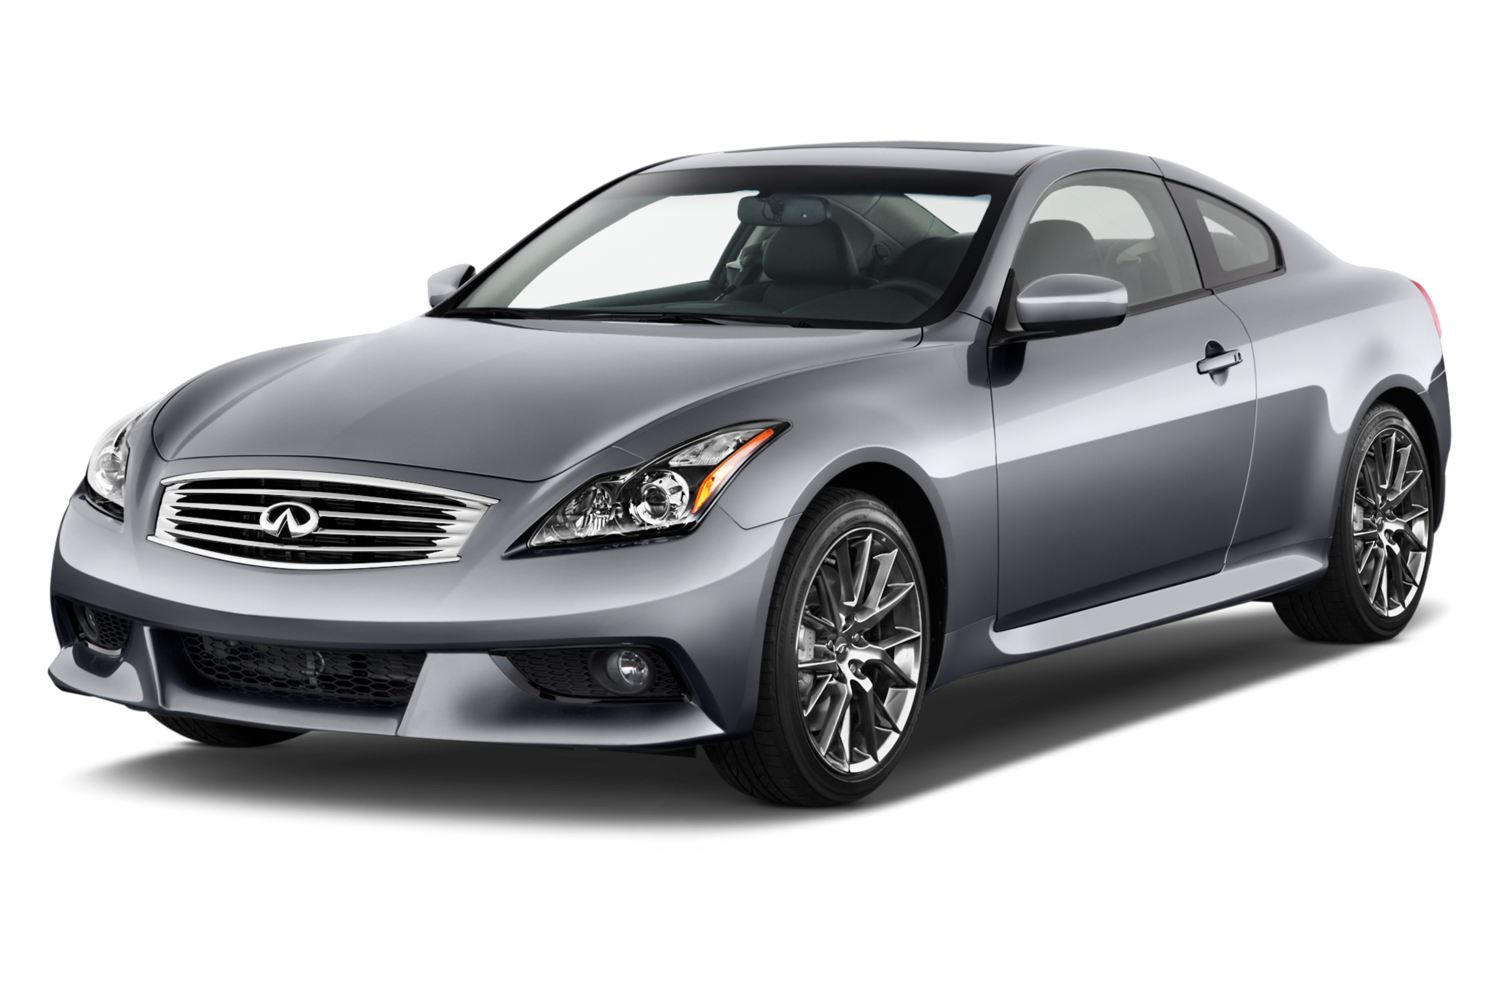 INFINITI G37 (2007-2015) 3.7L VQ35HR / VQ37VHR V6 - STAGE 1 PERFORMANCE PACKAGE COMBO WITH AMTFLASHER3 (OBD2FLASHER) INCLUDED - STD COMBO